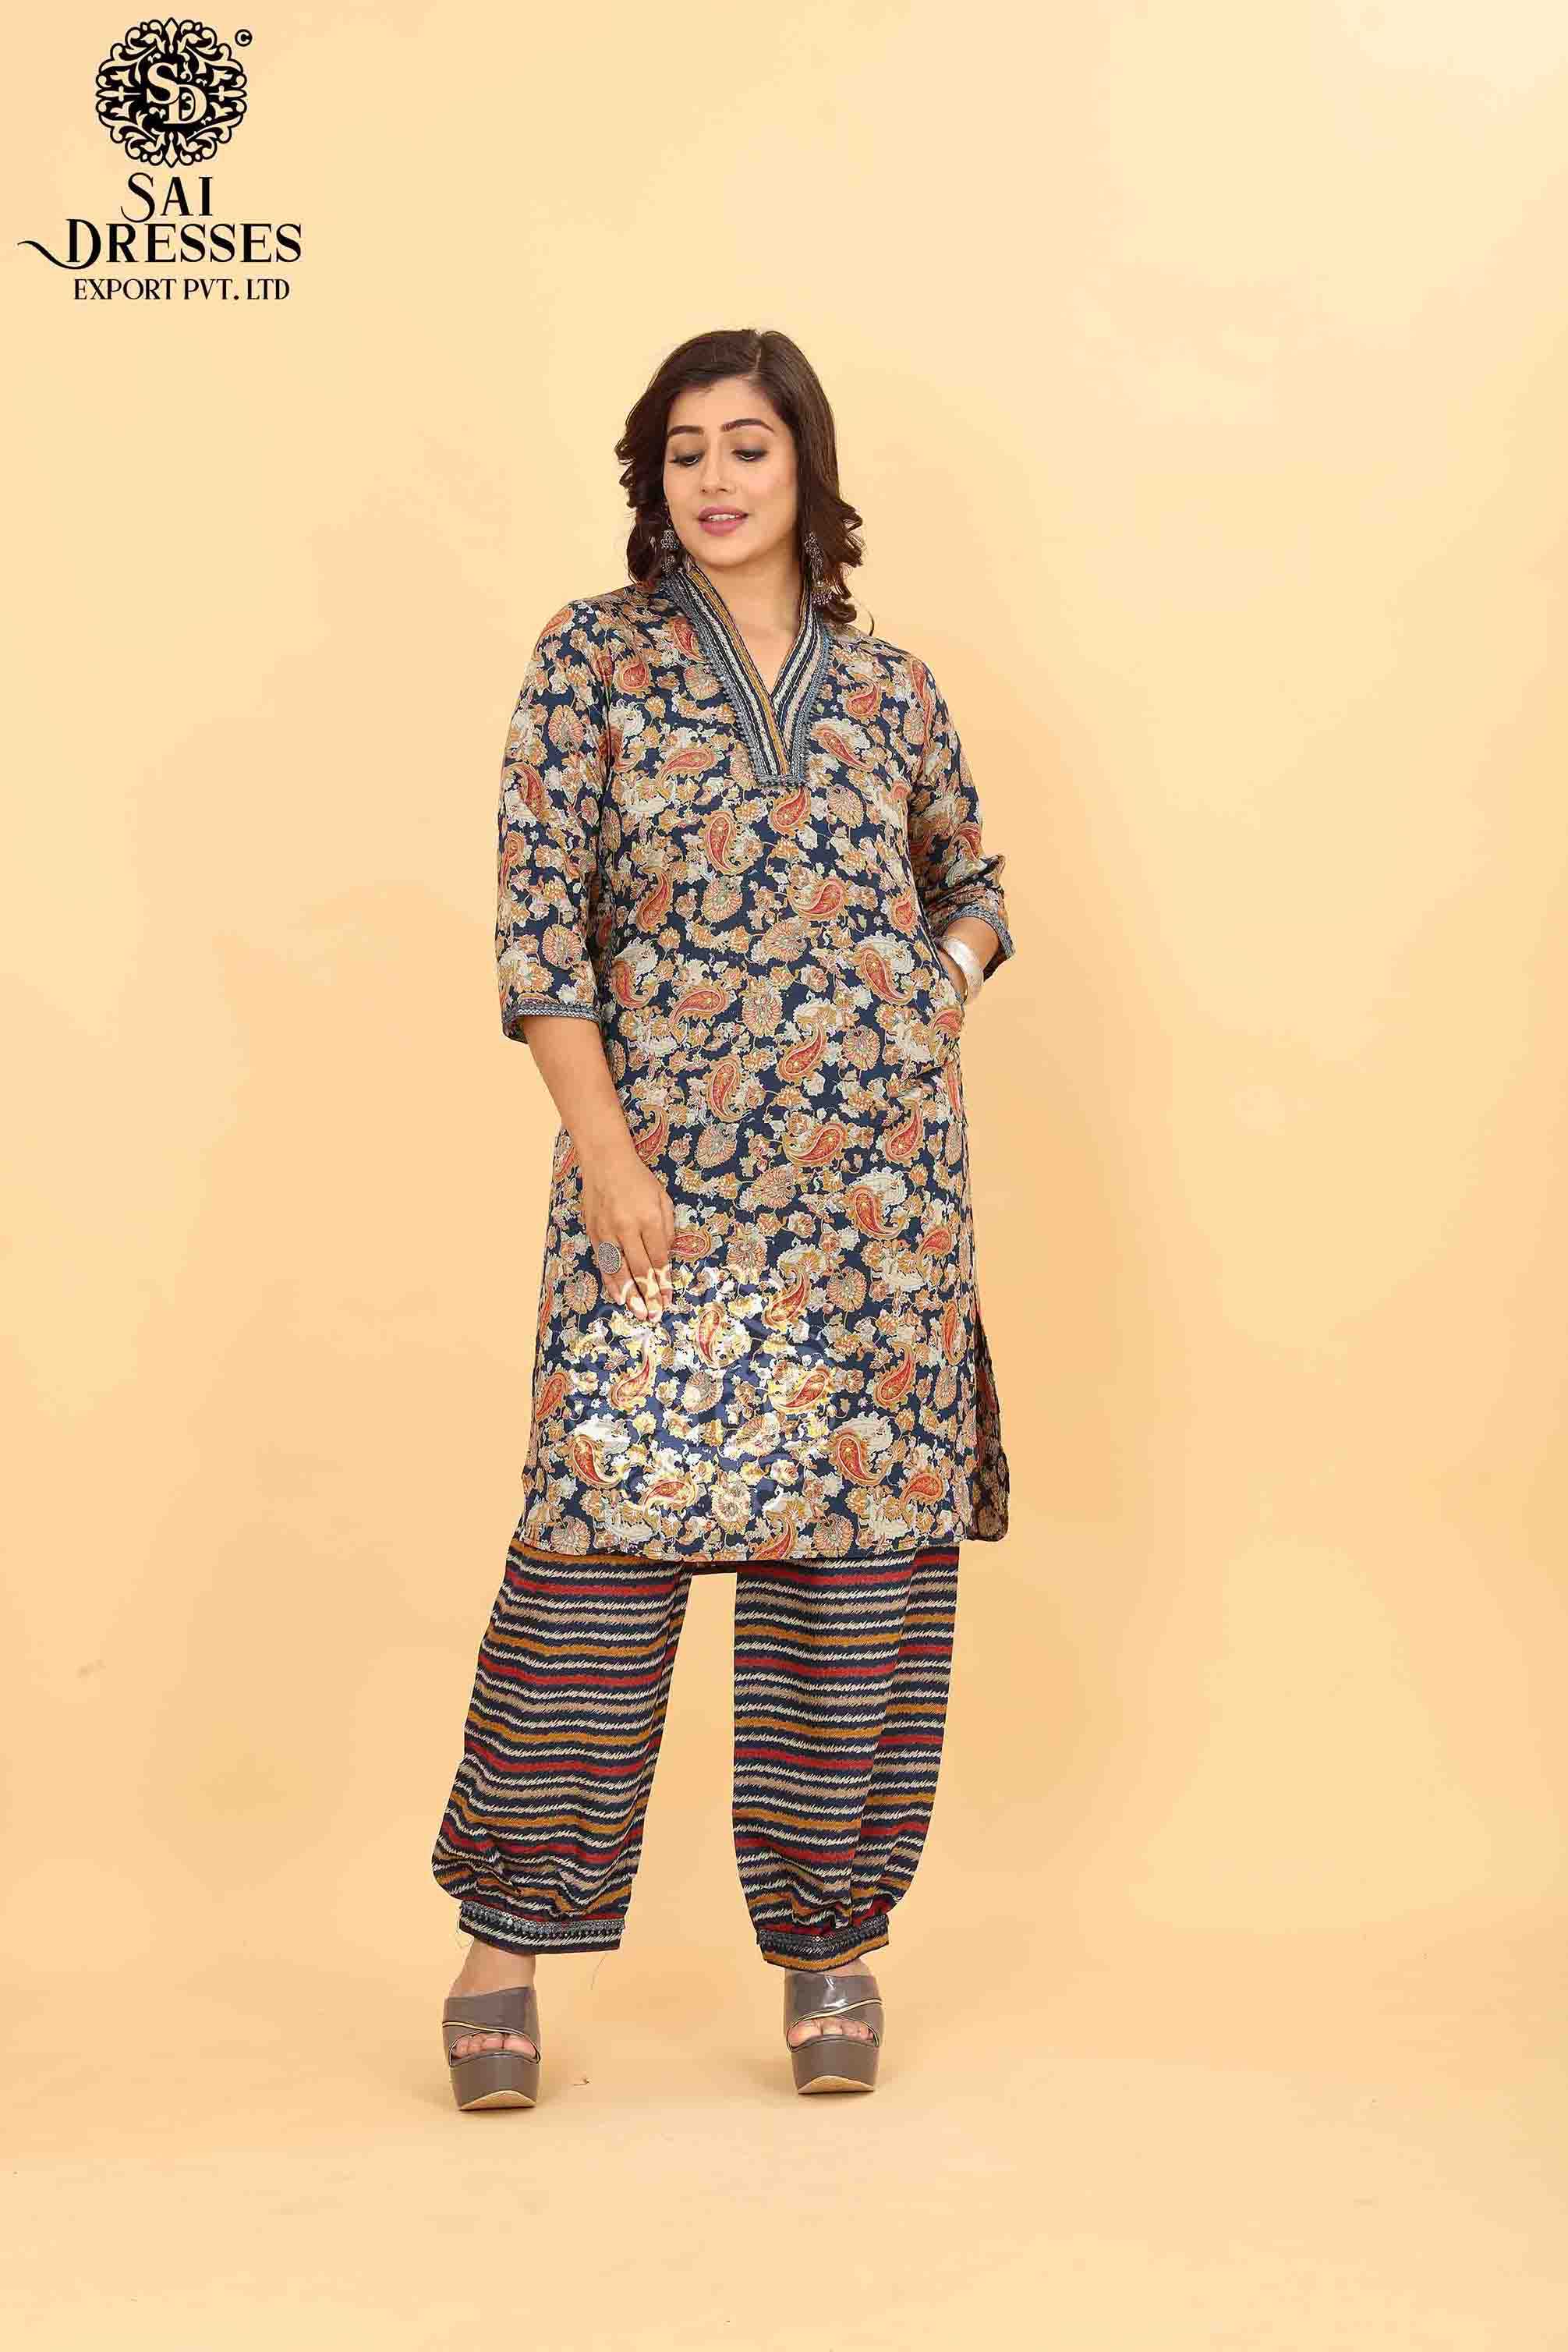 SAI DRESSES PRESENT D.NO SD 5011 READY TO EXCLUSIVE TRENDY WEAR PATHANI KURTA WITH AFGHANI PANT STYLE COMBO COLLECTION IN WHOLESALE RATE IN SURAT